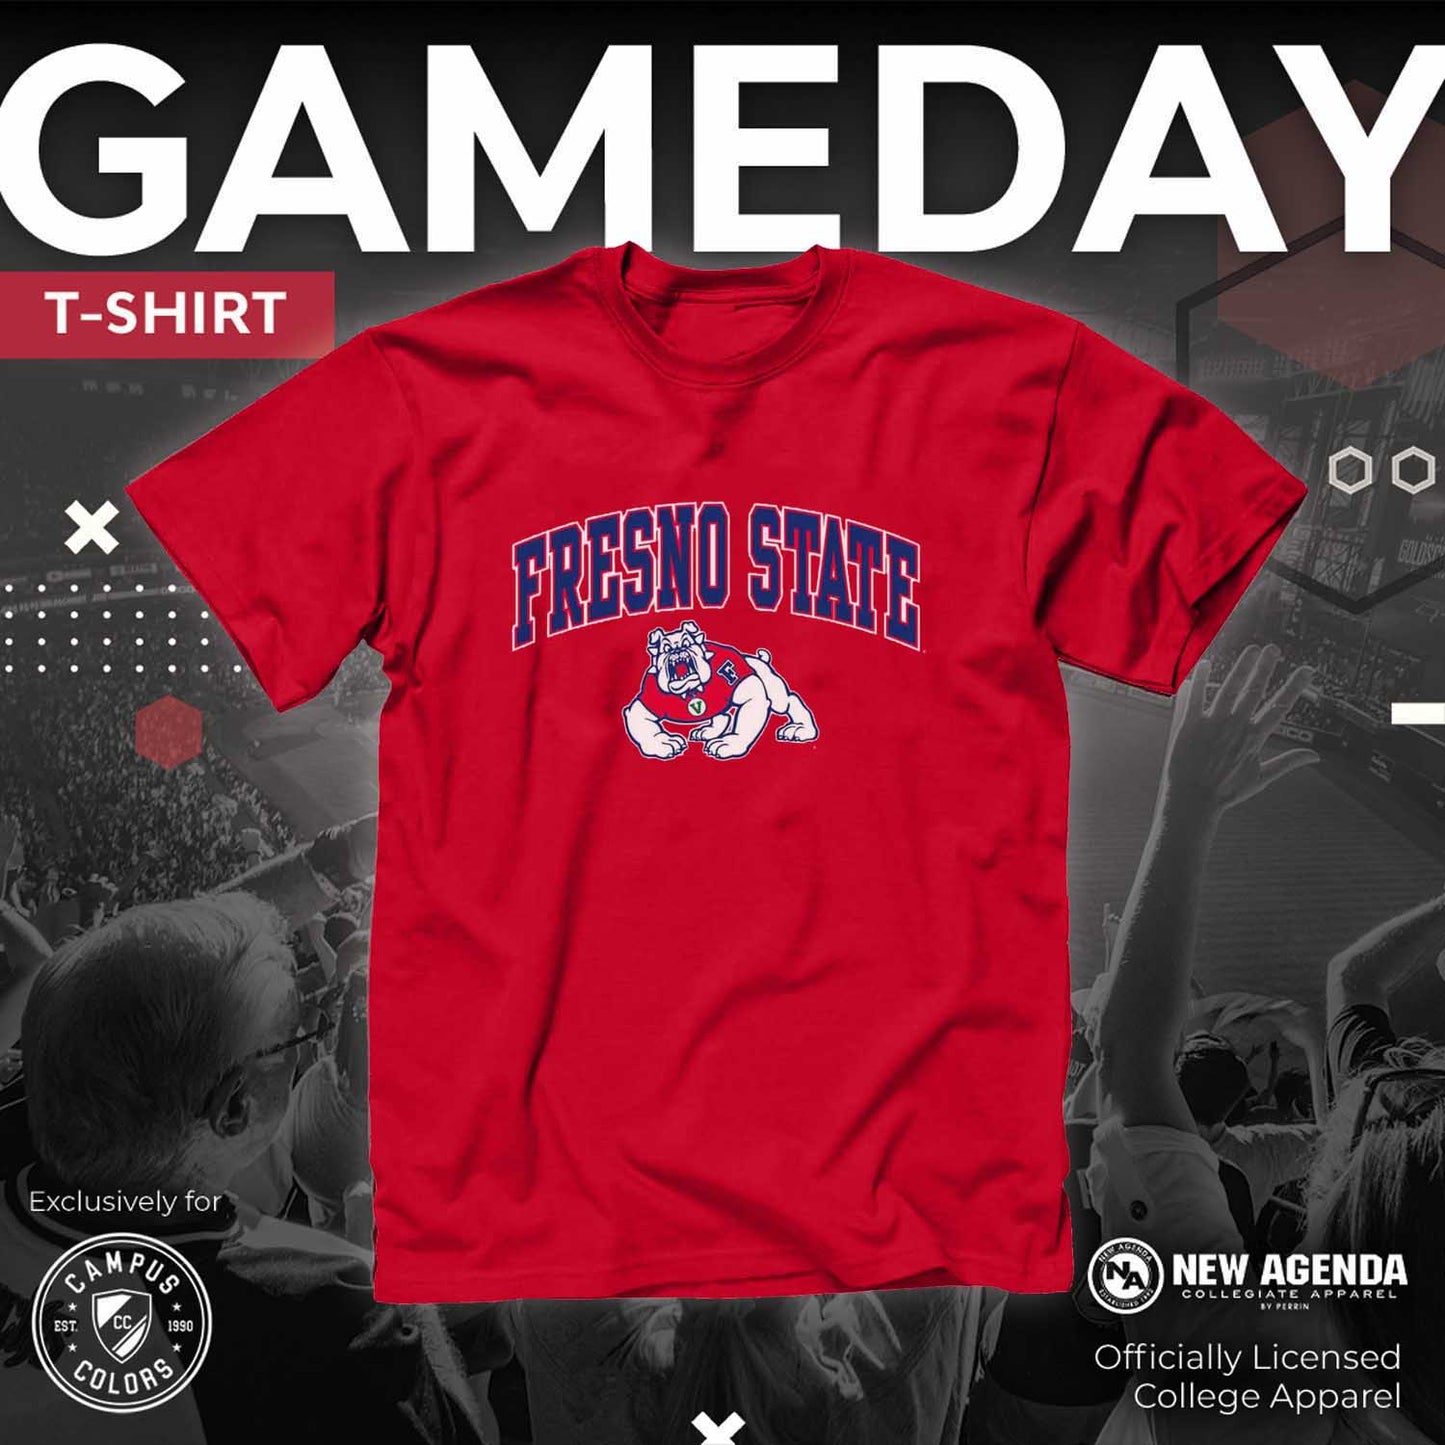 Fresno State Bulldogs NCAA Adult Gameday Cotton T-Shirt - Red